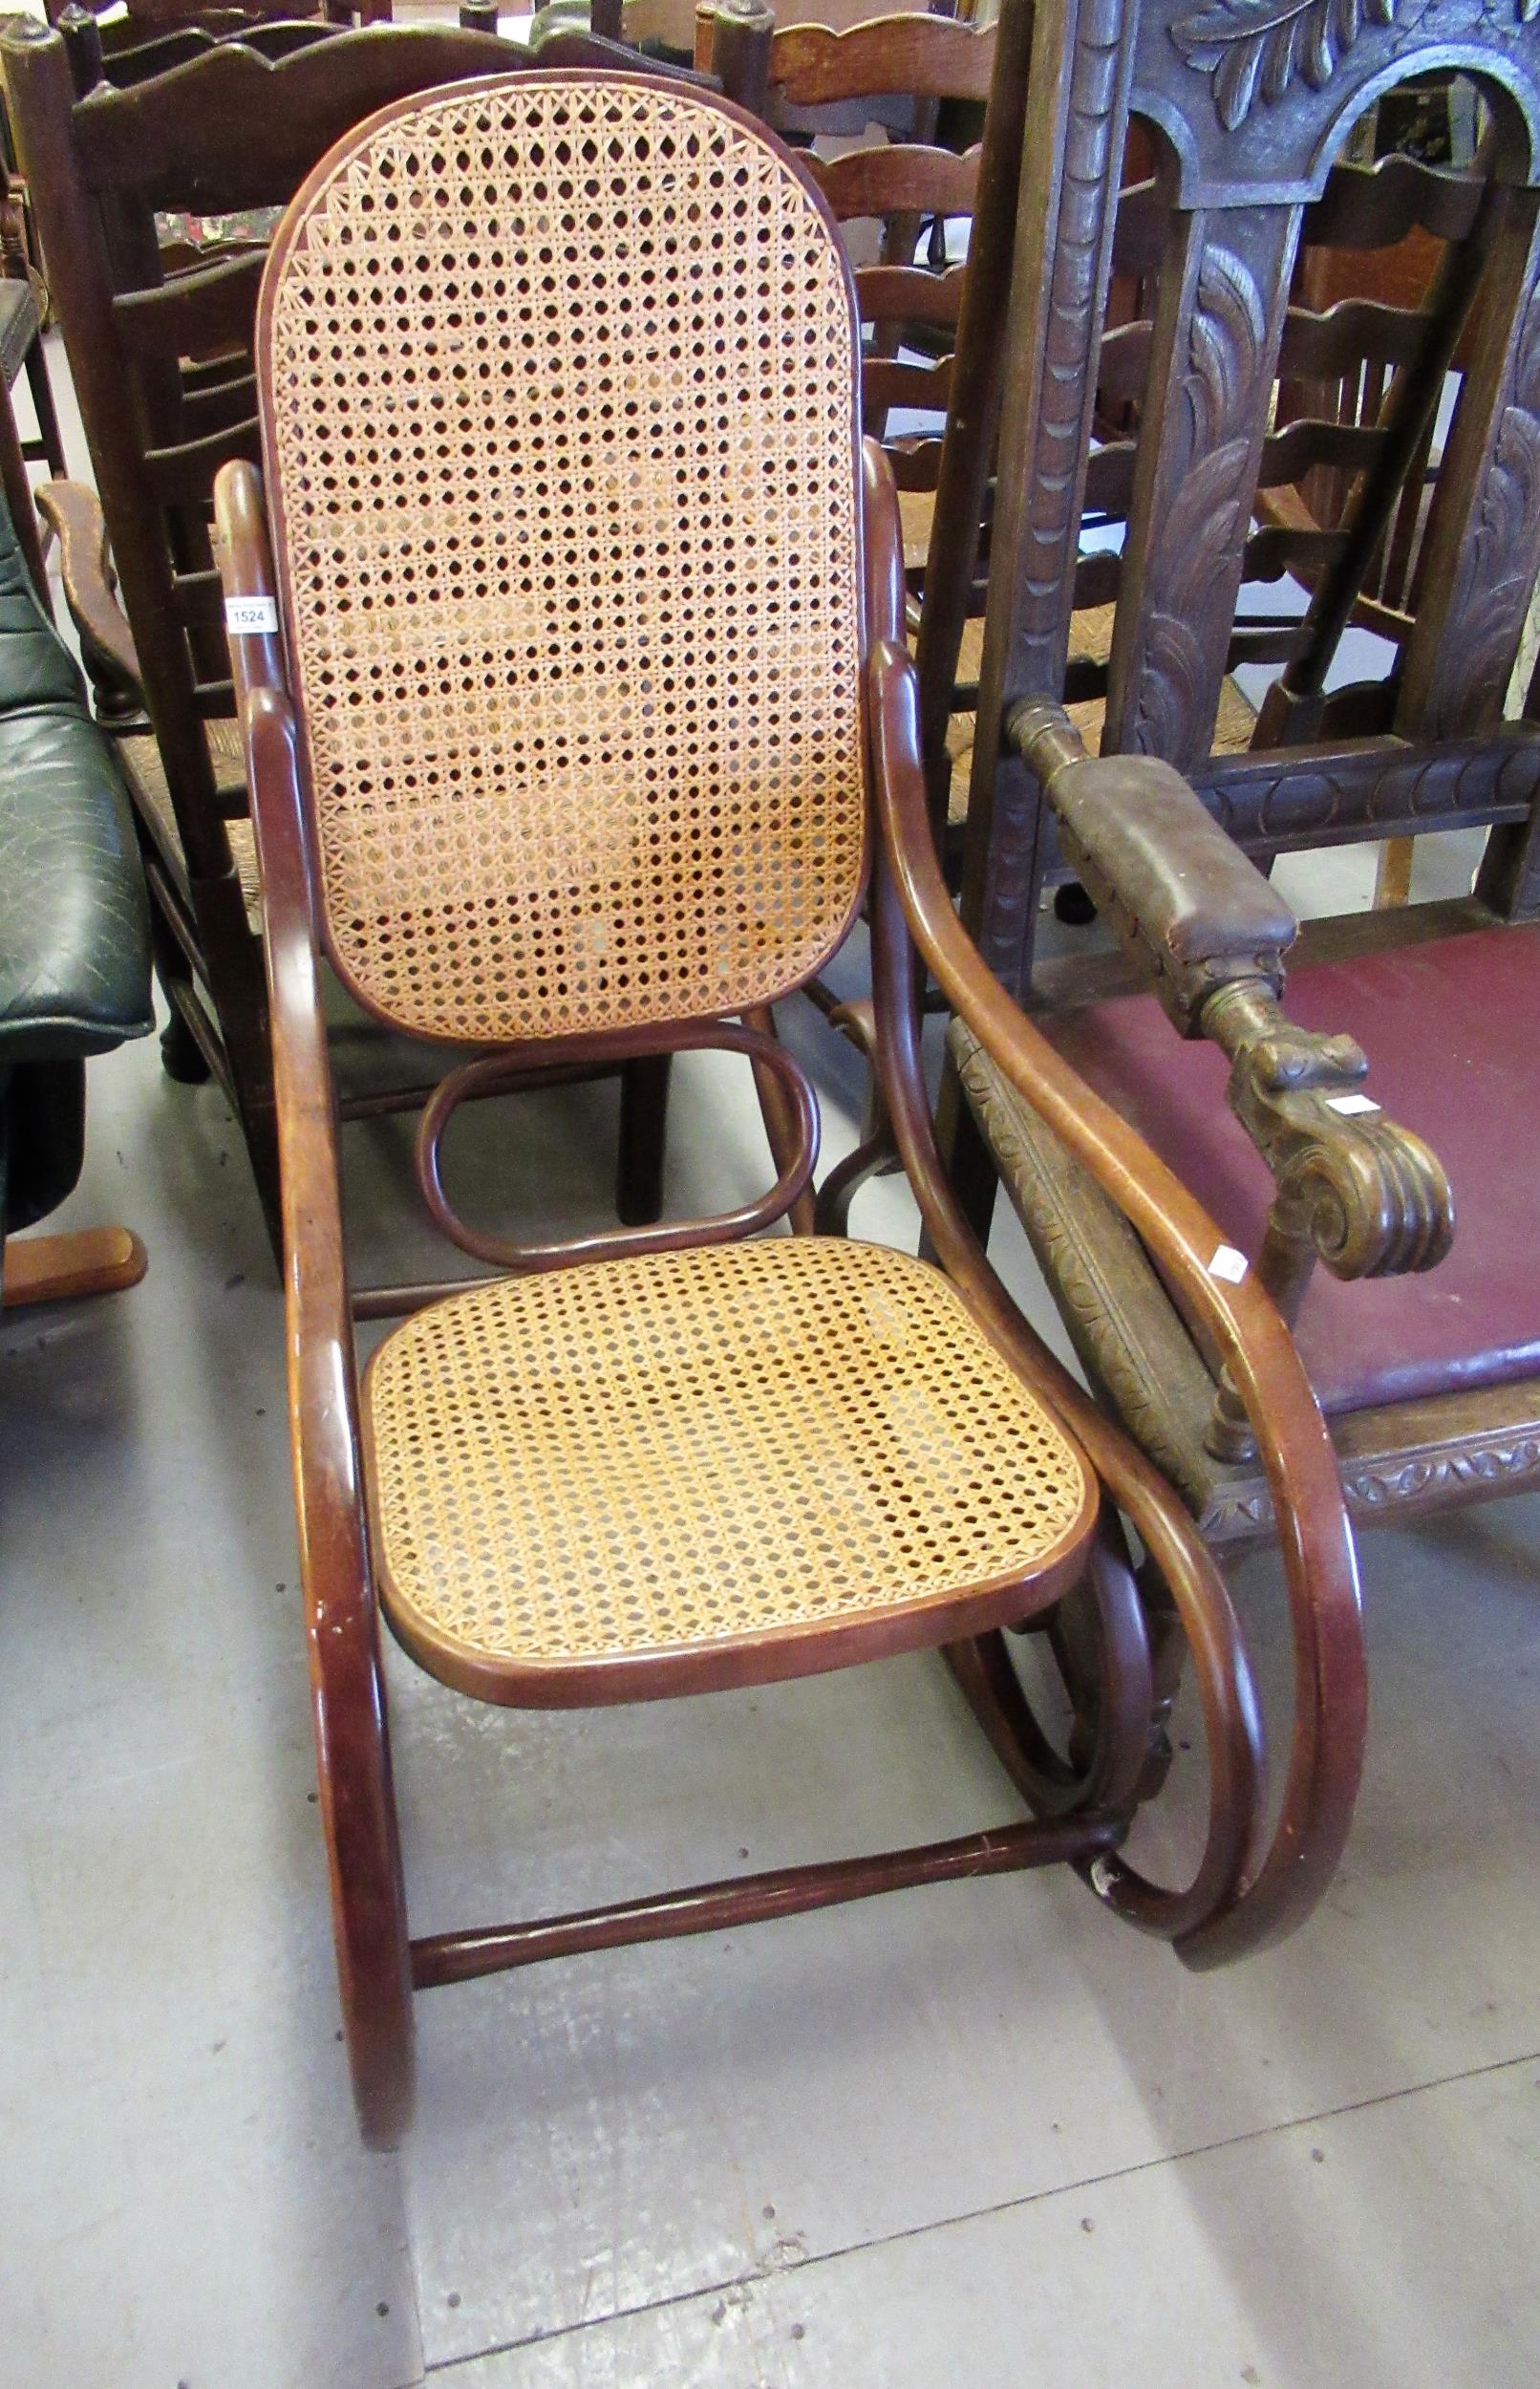 20th Century bentwood rocking chair with cane back and seat